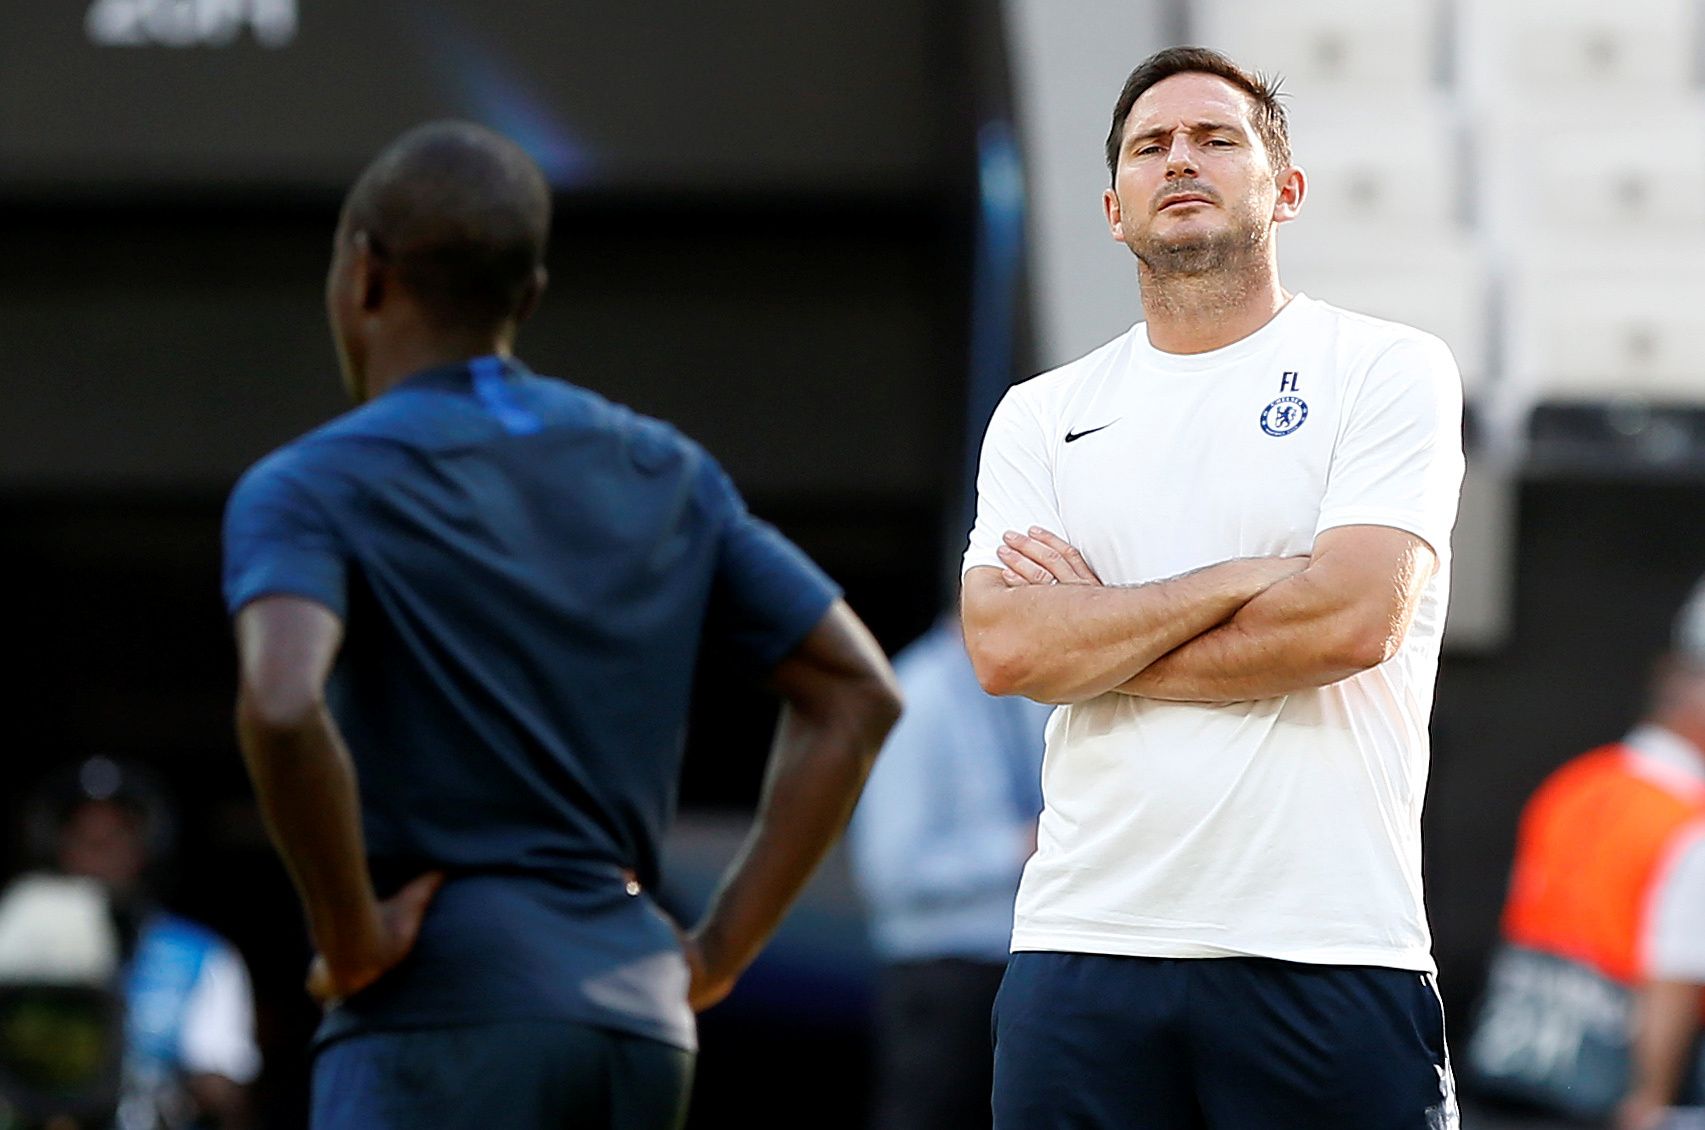 Soccer Football - UEFA Super Cup - Chelsea Training - Vodafone Park, Istanbul, Turkey - August 13, 2019   Chelsea manager Frank Lampard during training   REUTERS/Kemal Aslan